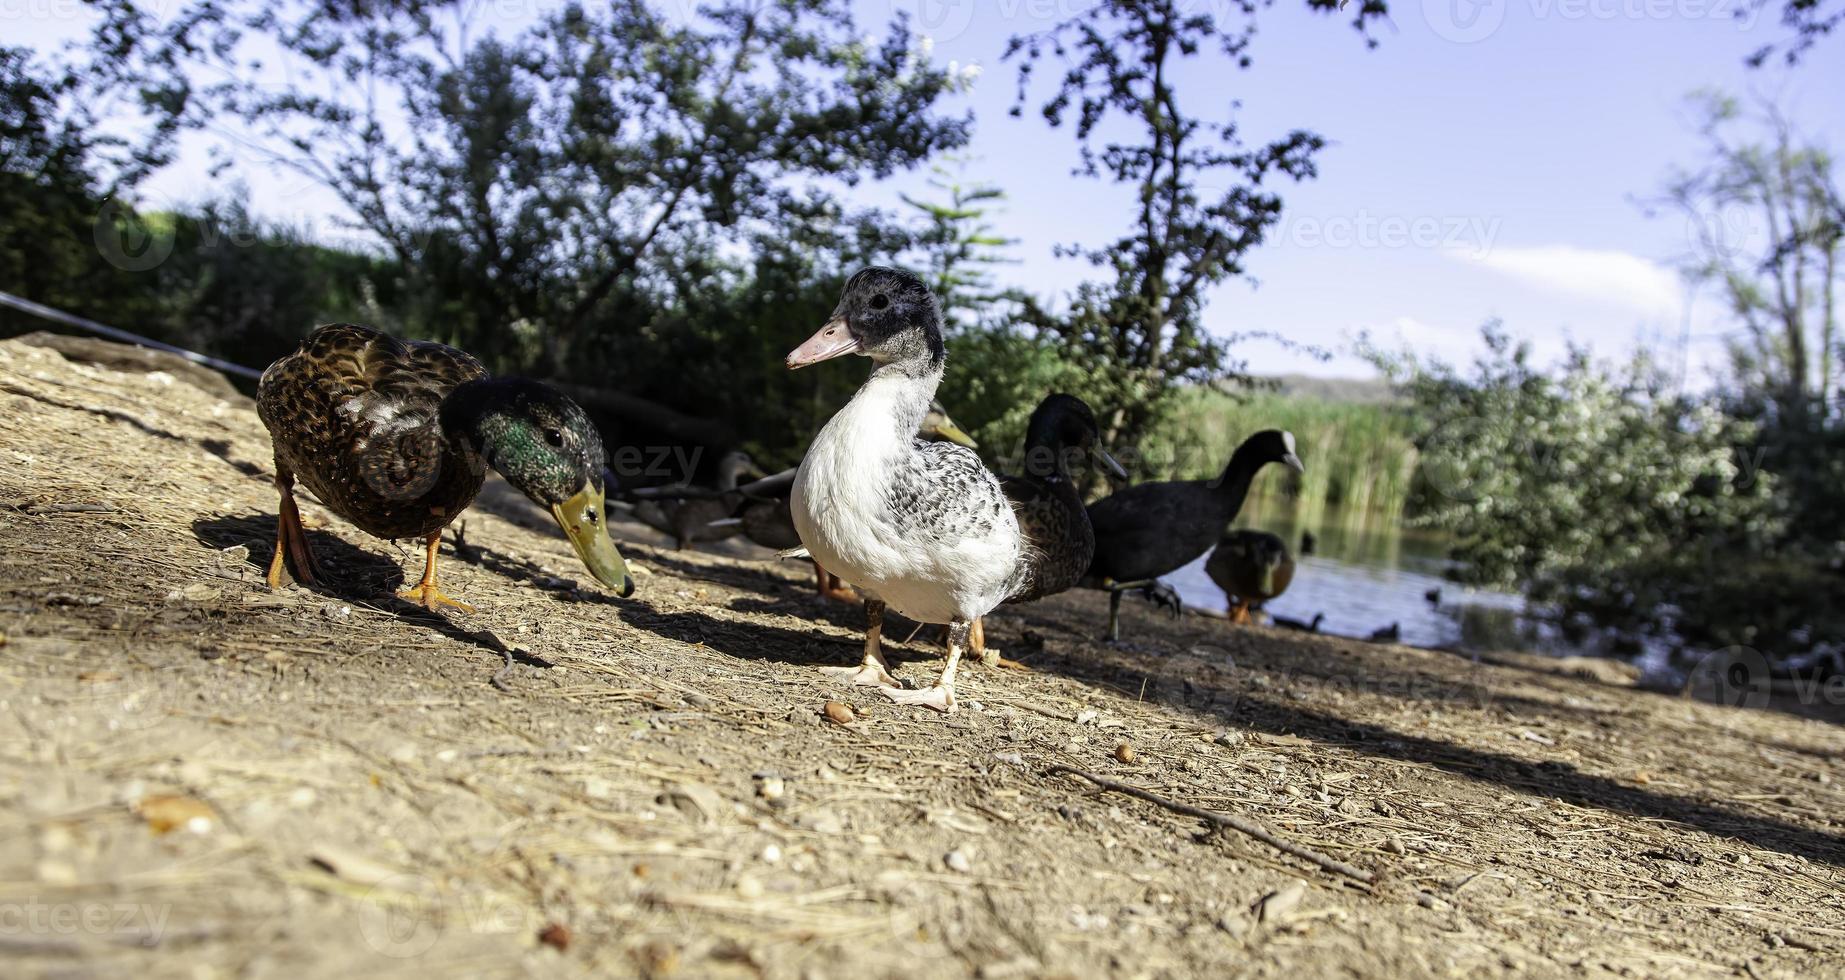 Ducks eating in nature photo